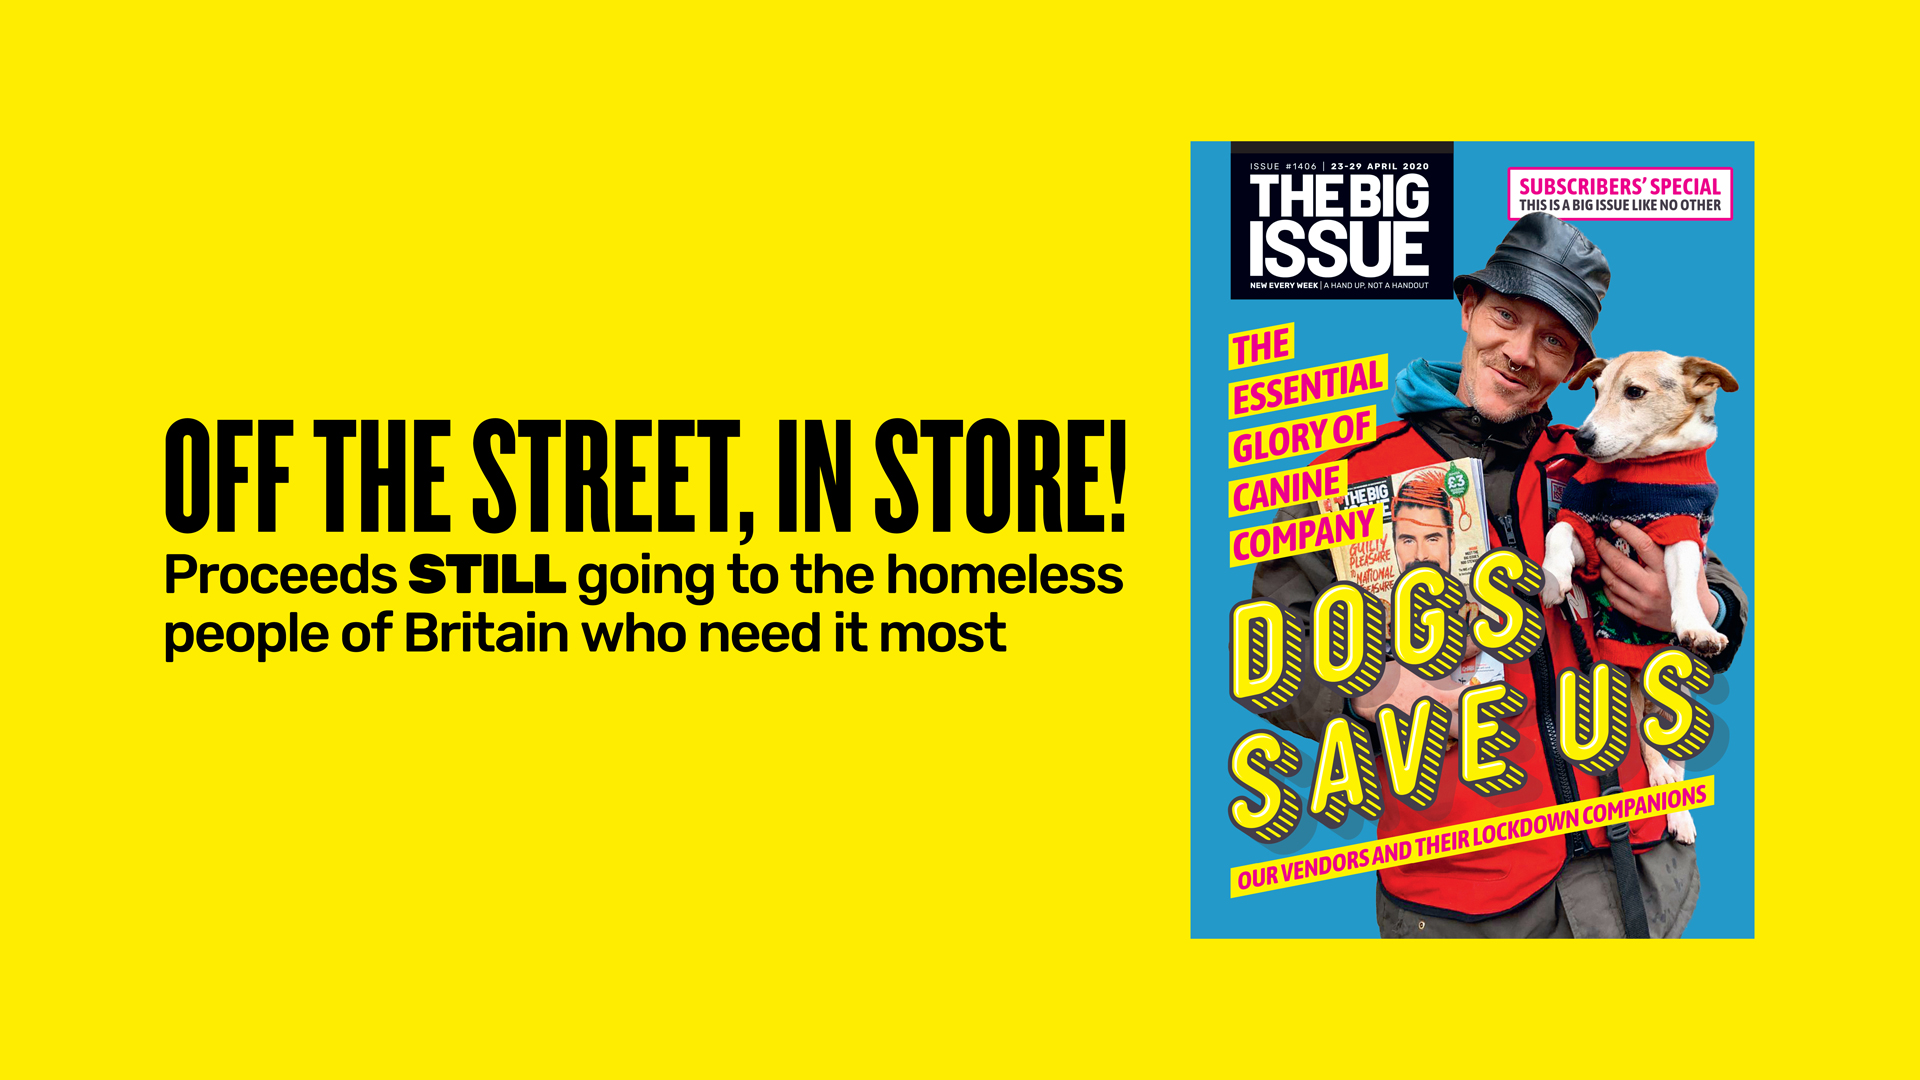 The Big Issue is available to buy in-store at outlets including ASDA and WHSmith